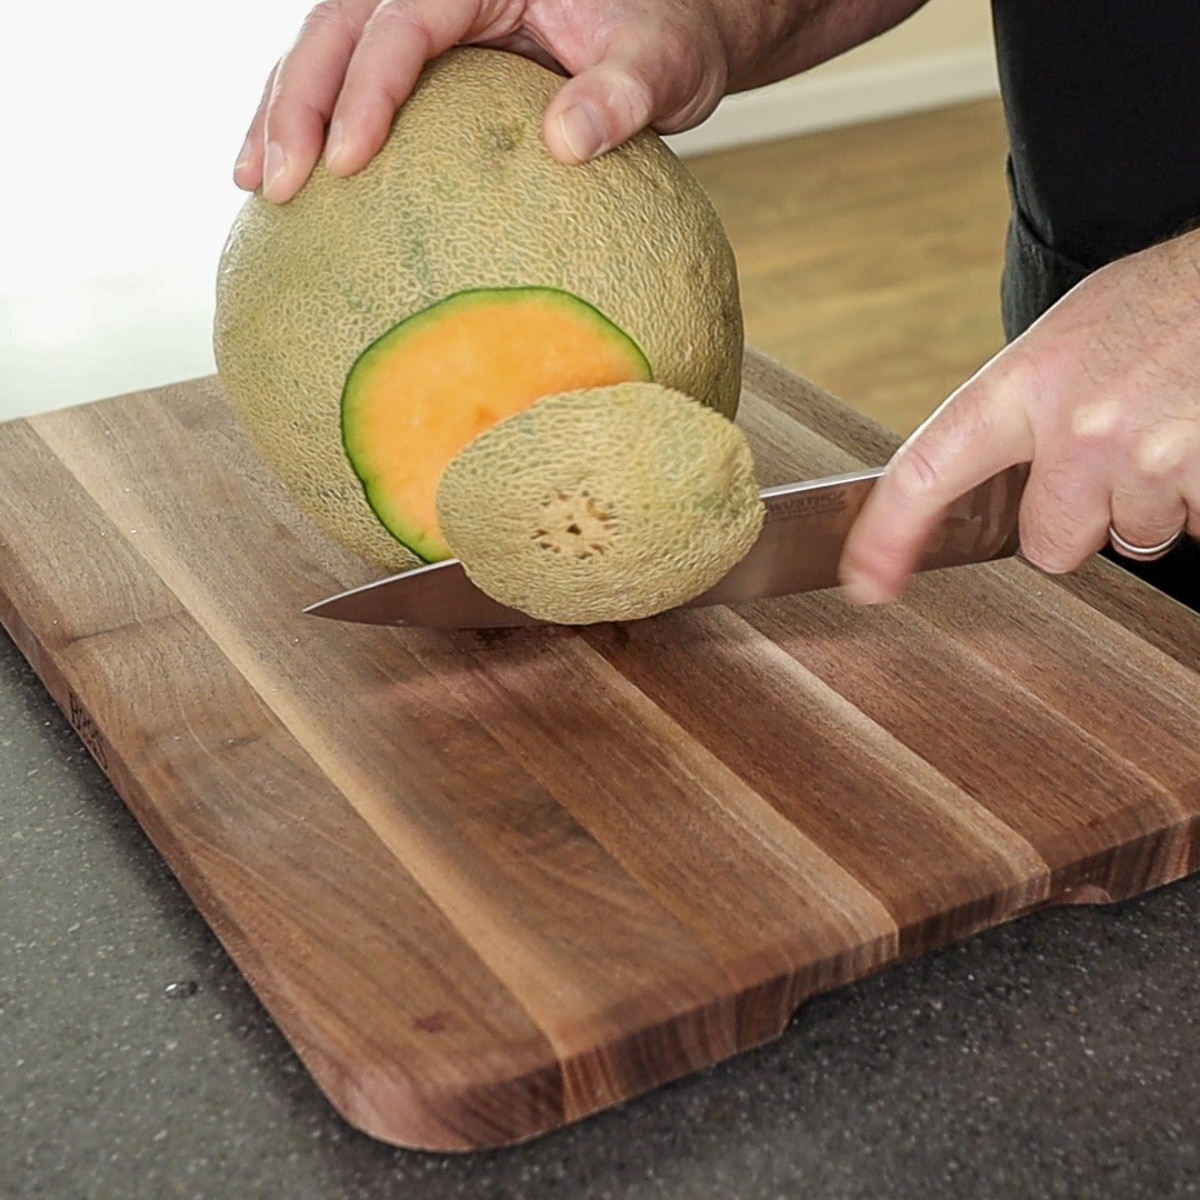 Cutting the end off of the cantaloupe
